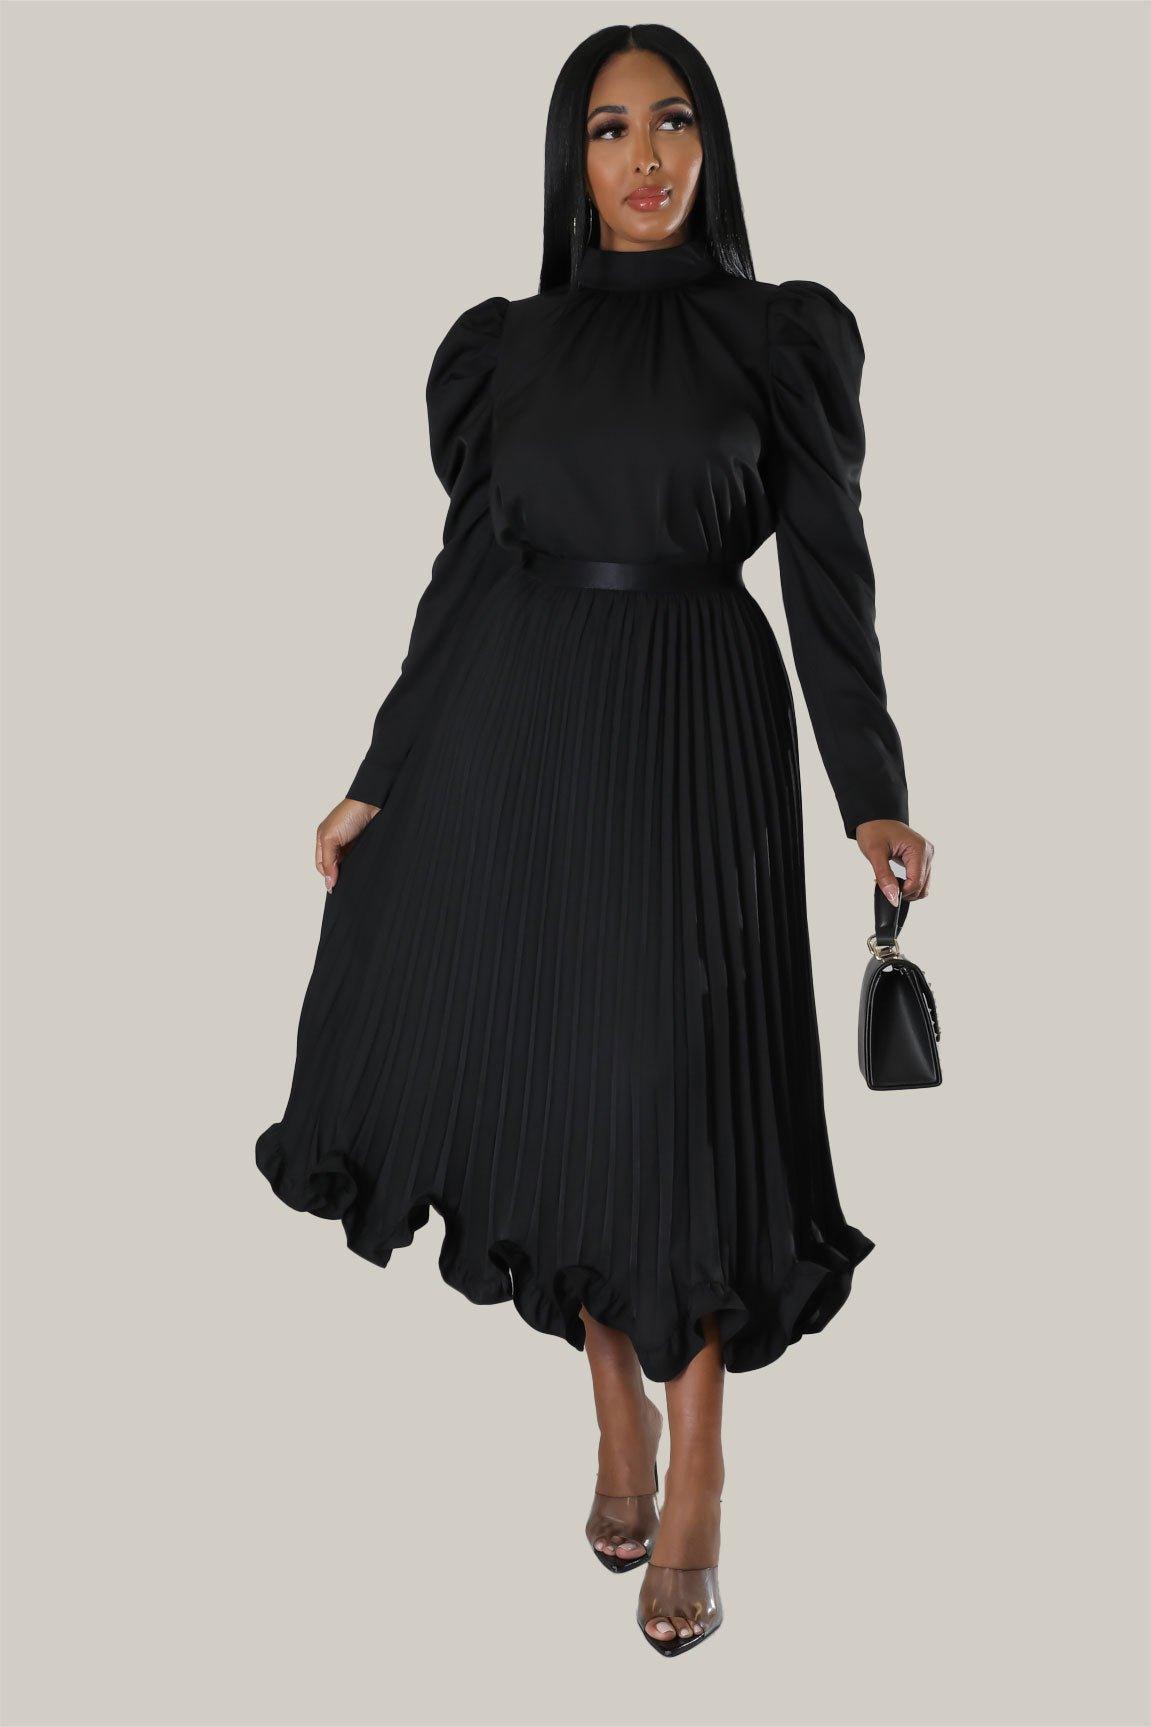 Expensive Taste Pleated Skirt Set - MY SEXY STYLES